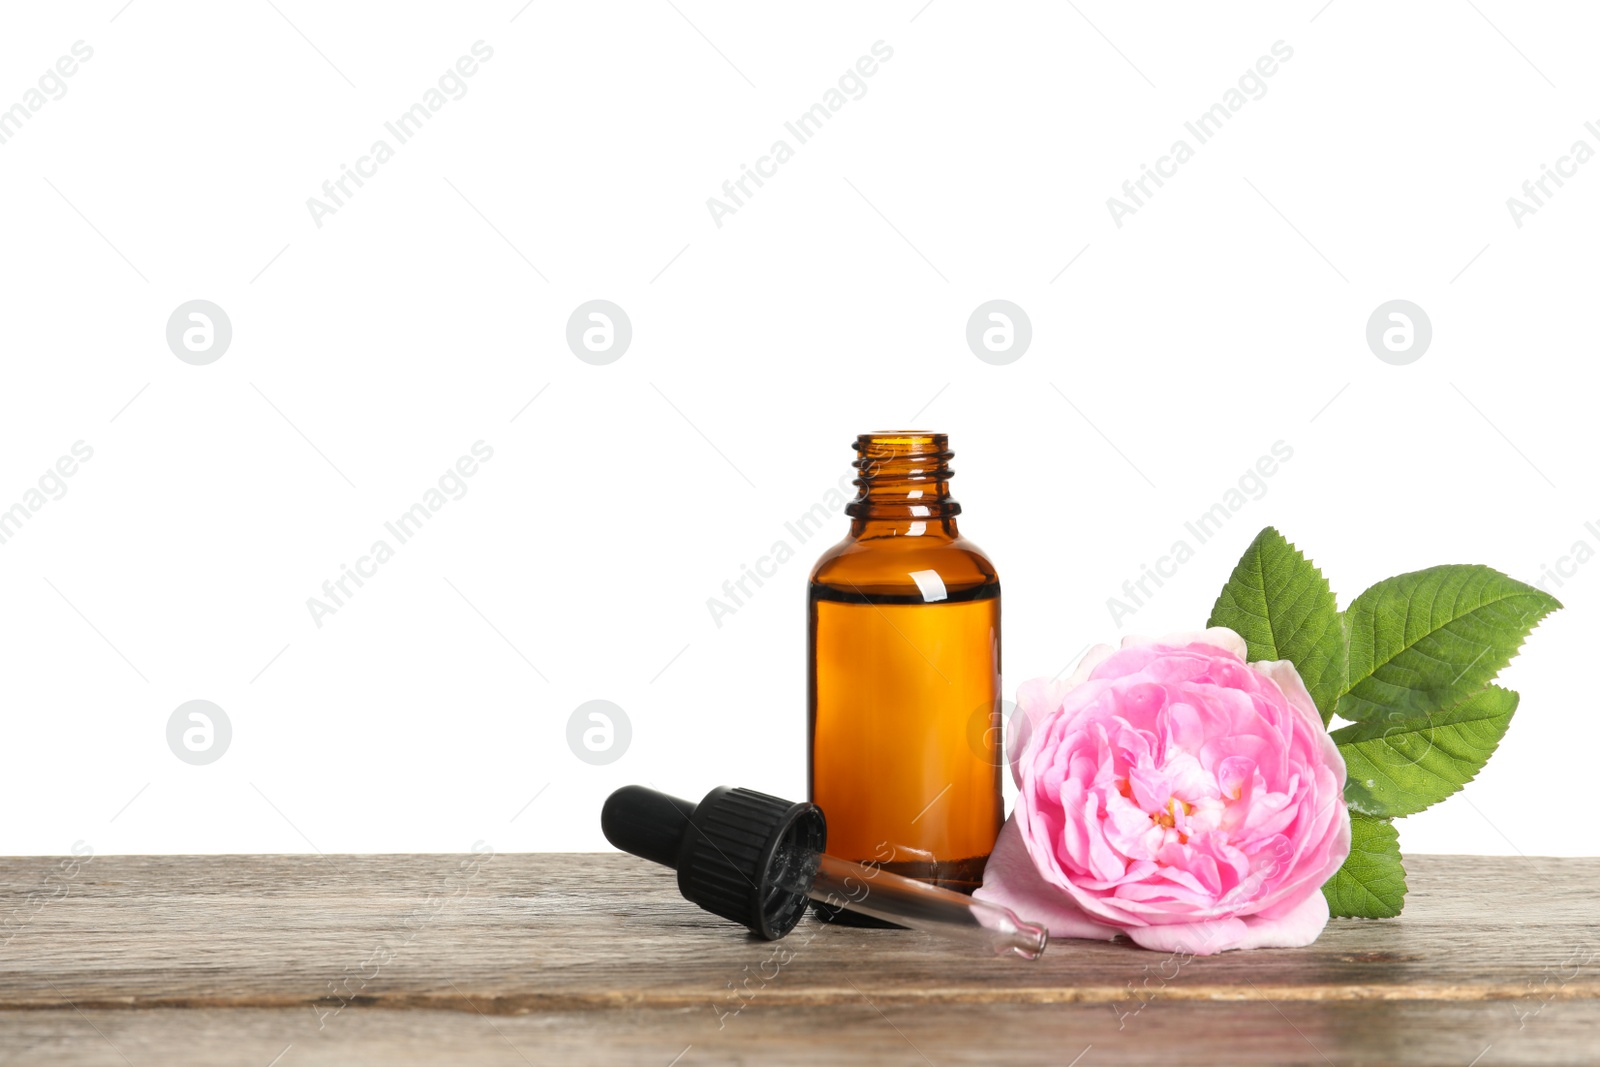 Photo of Bottle of rose essential oil, pipette and flower on table, white background